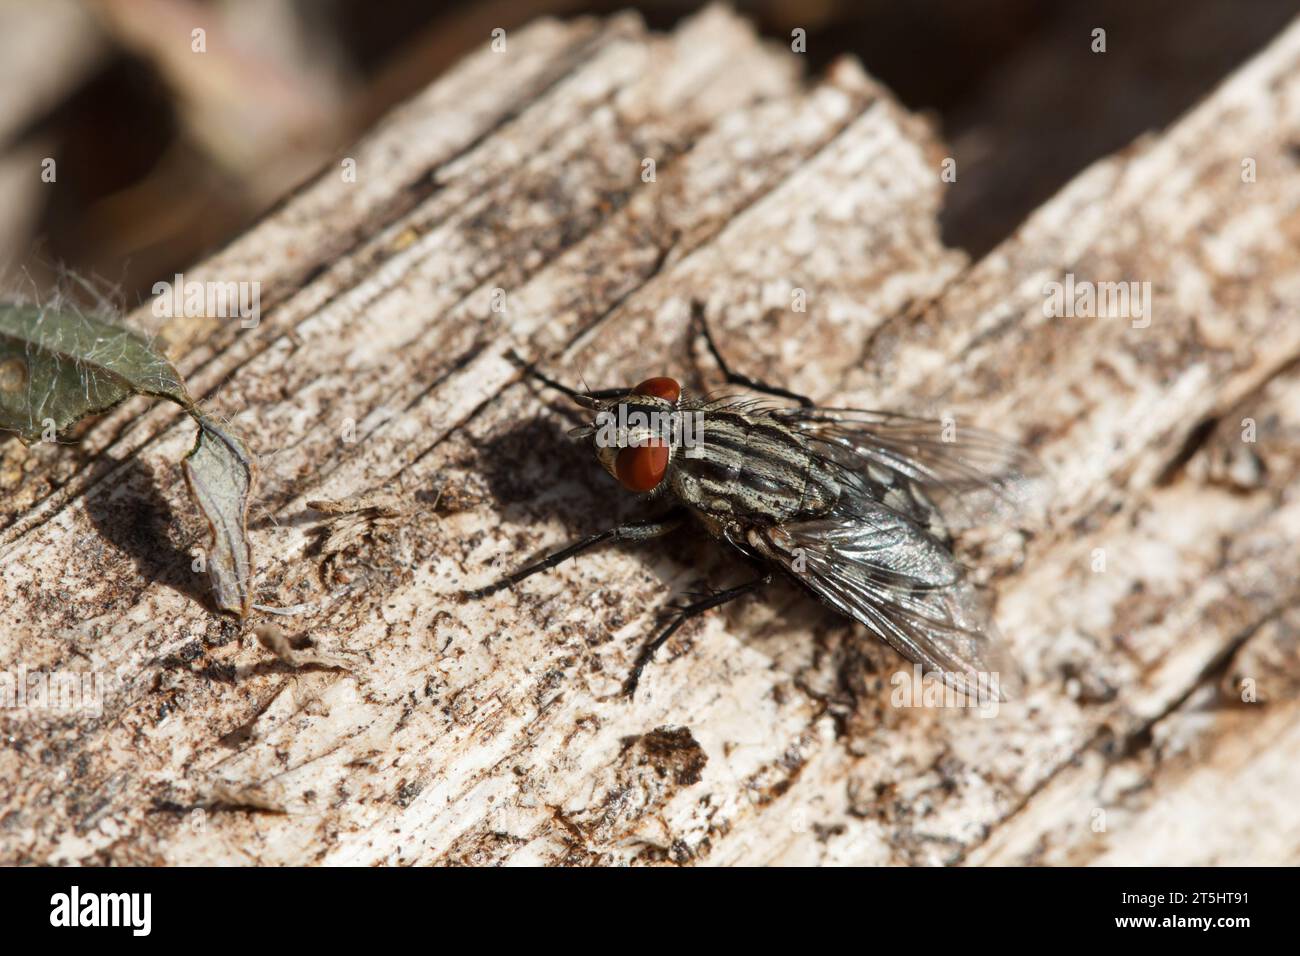 Fly of the species Sarcophaga carnaria on decaying tree trunk, Bocairent, Spain Stock Photo